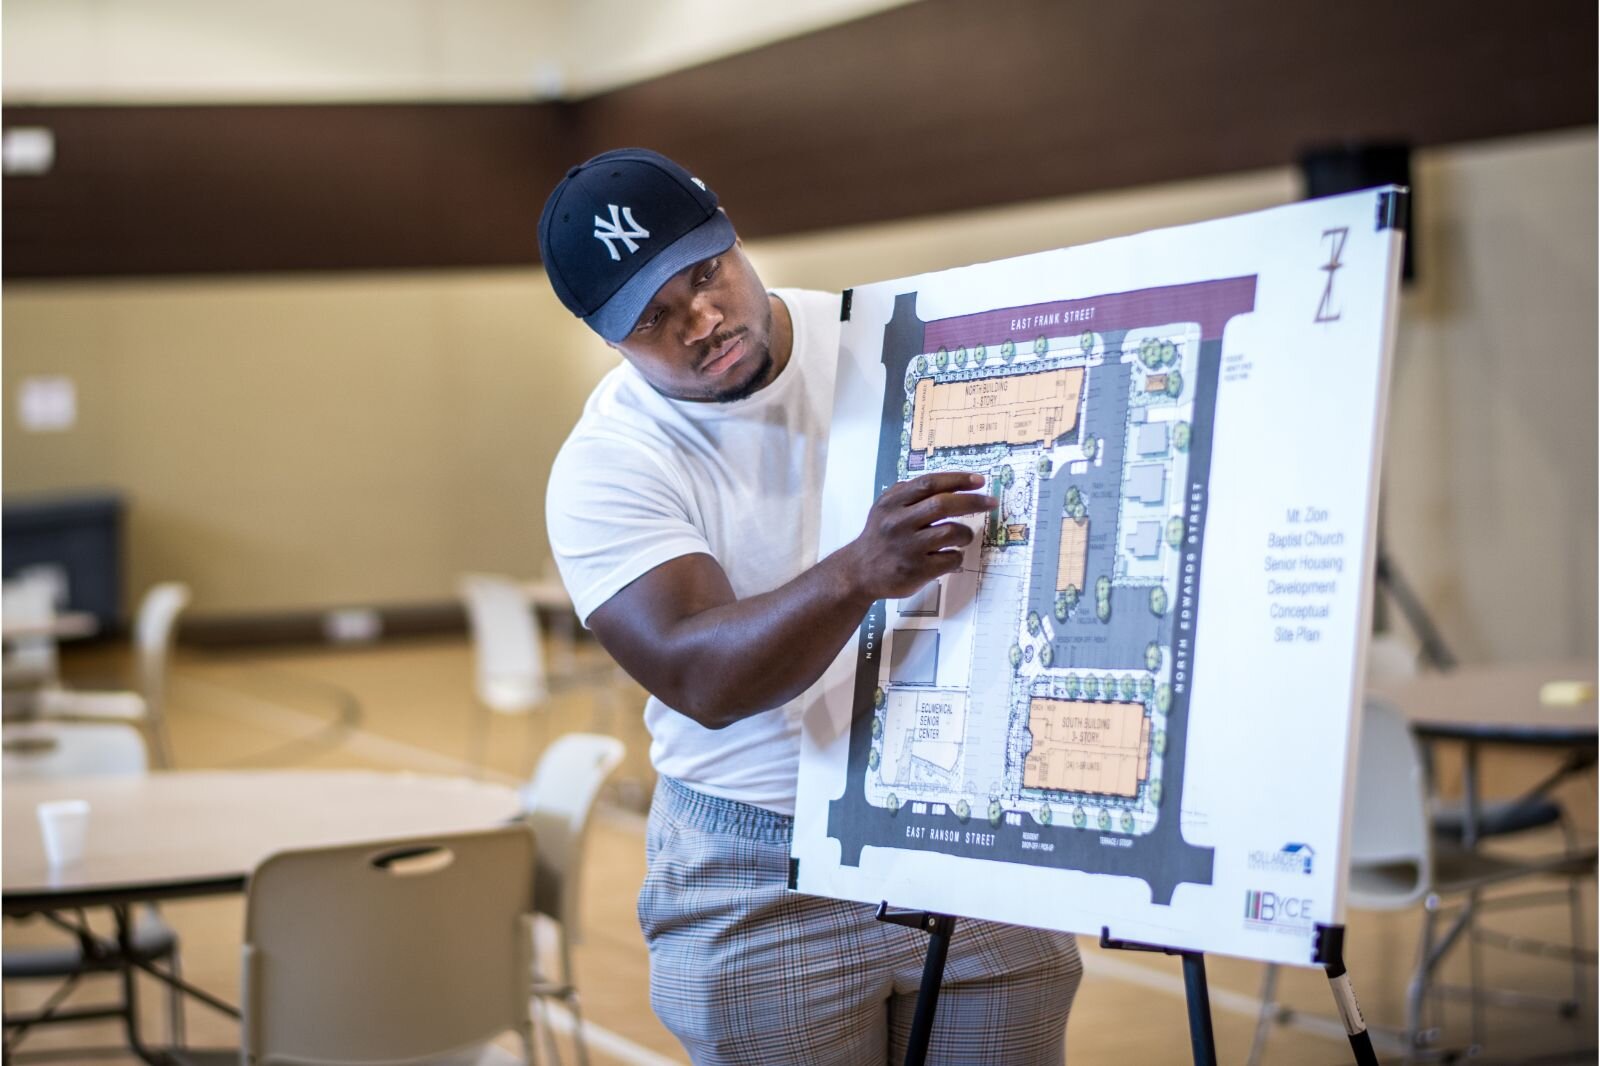 Jamauri Bogan, an associate developer working for Hollander Development Corp., points out features of Mt. Zion’s affordable senior housing complex during a July 21, 2022 community input session.